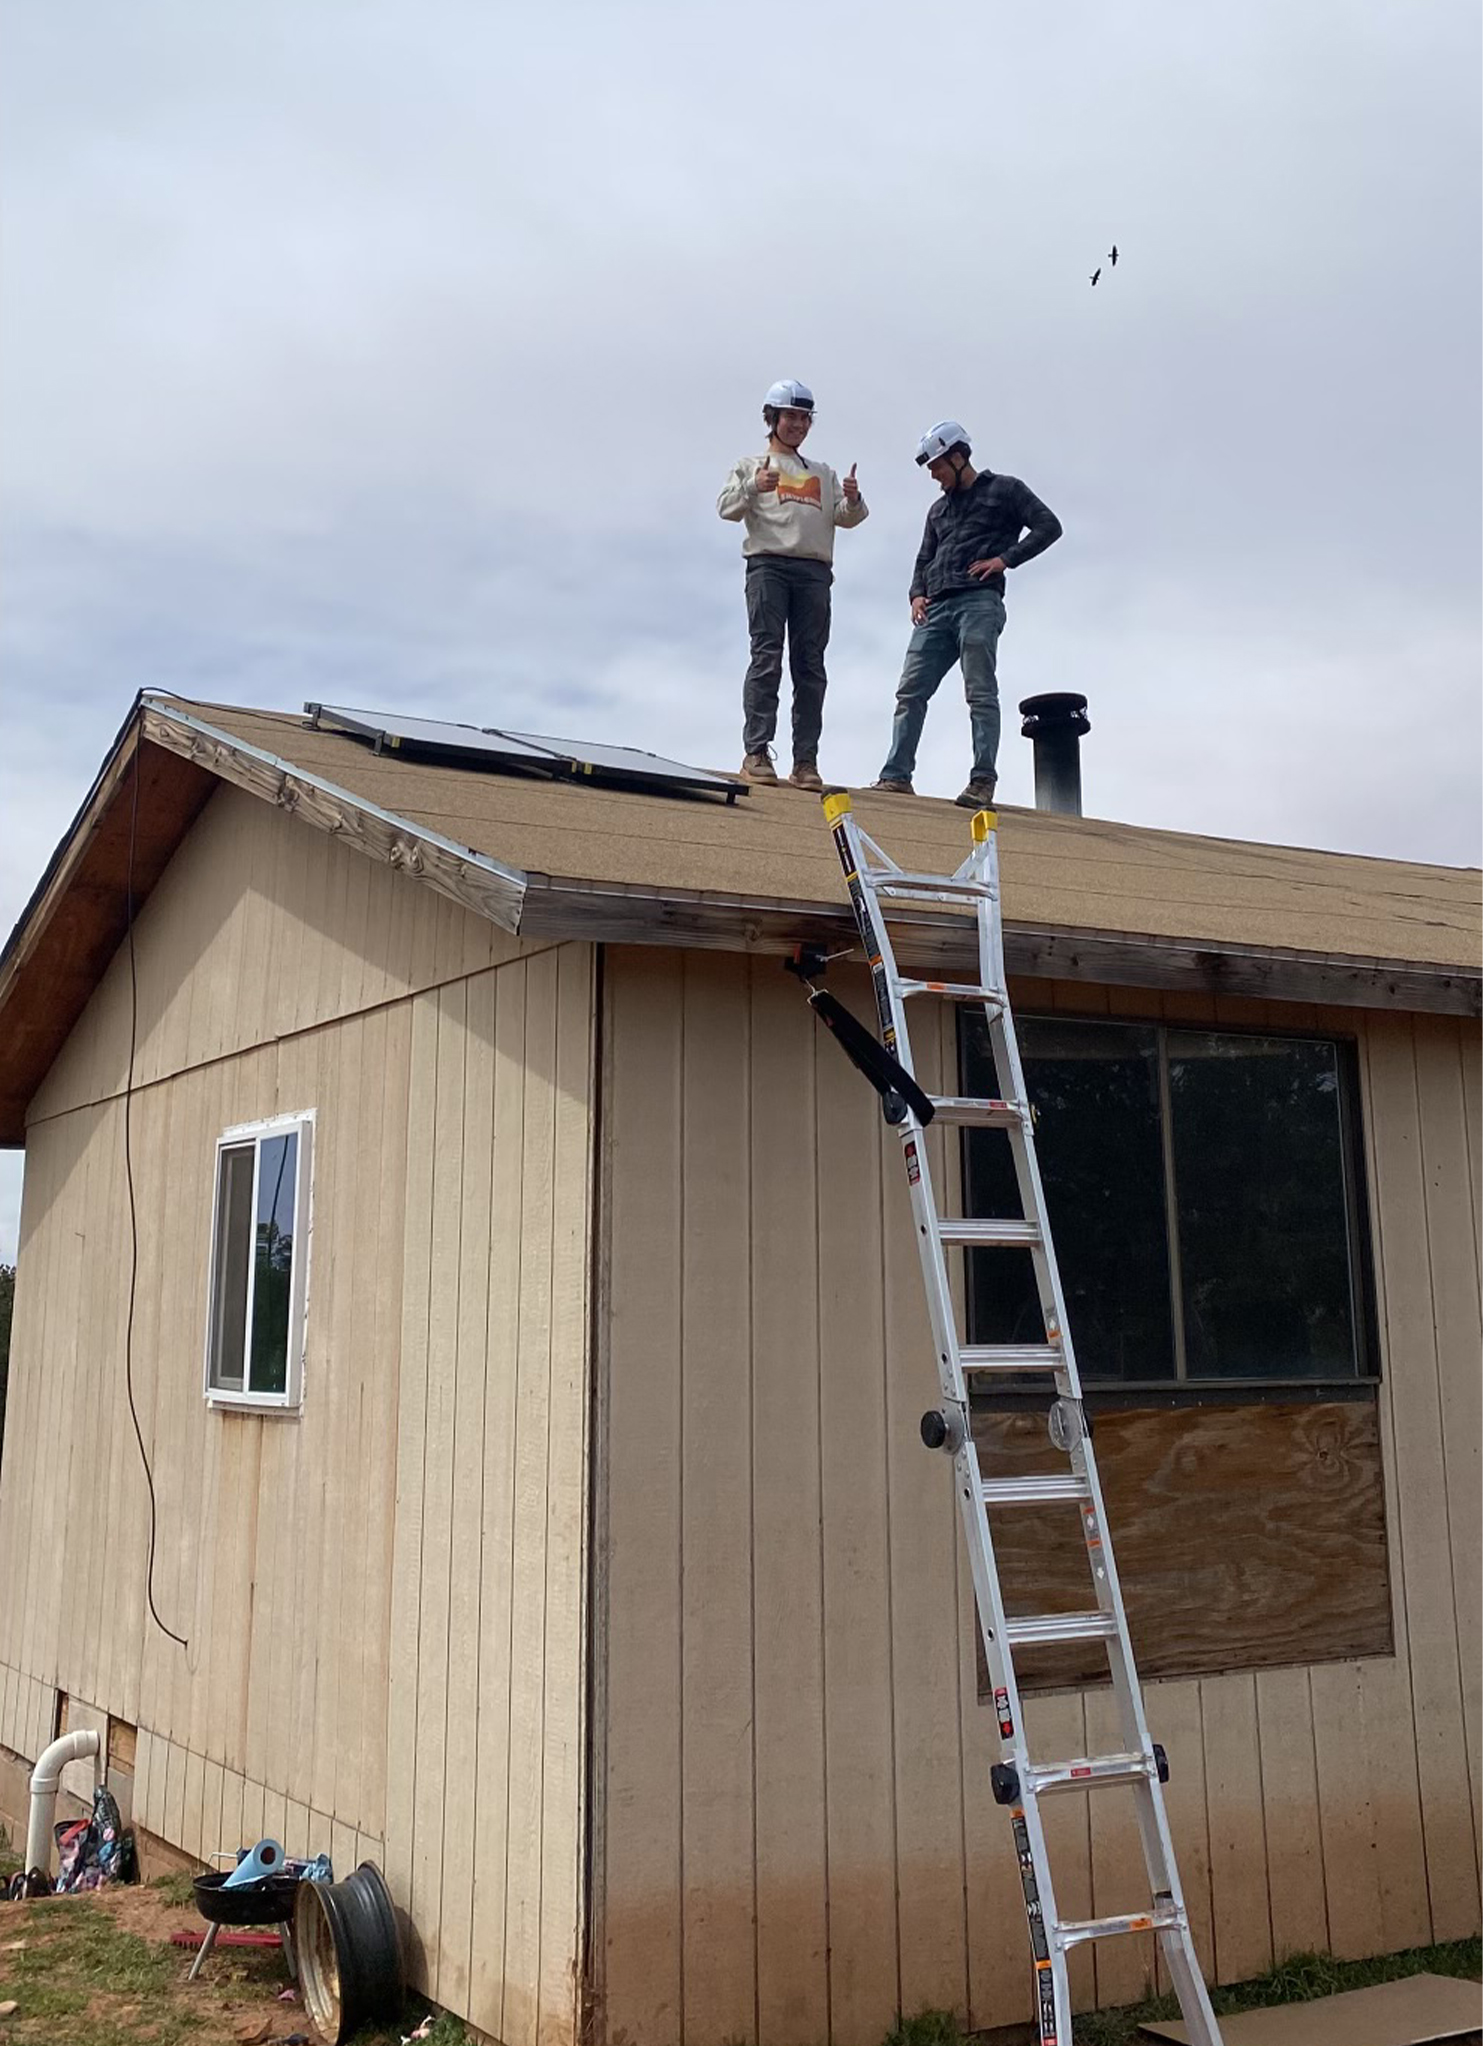 Two students install solar panels on roof